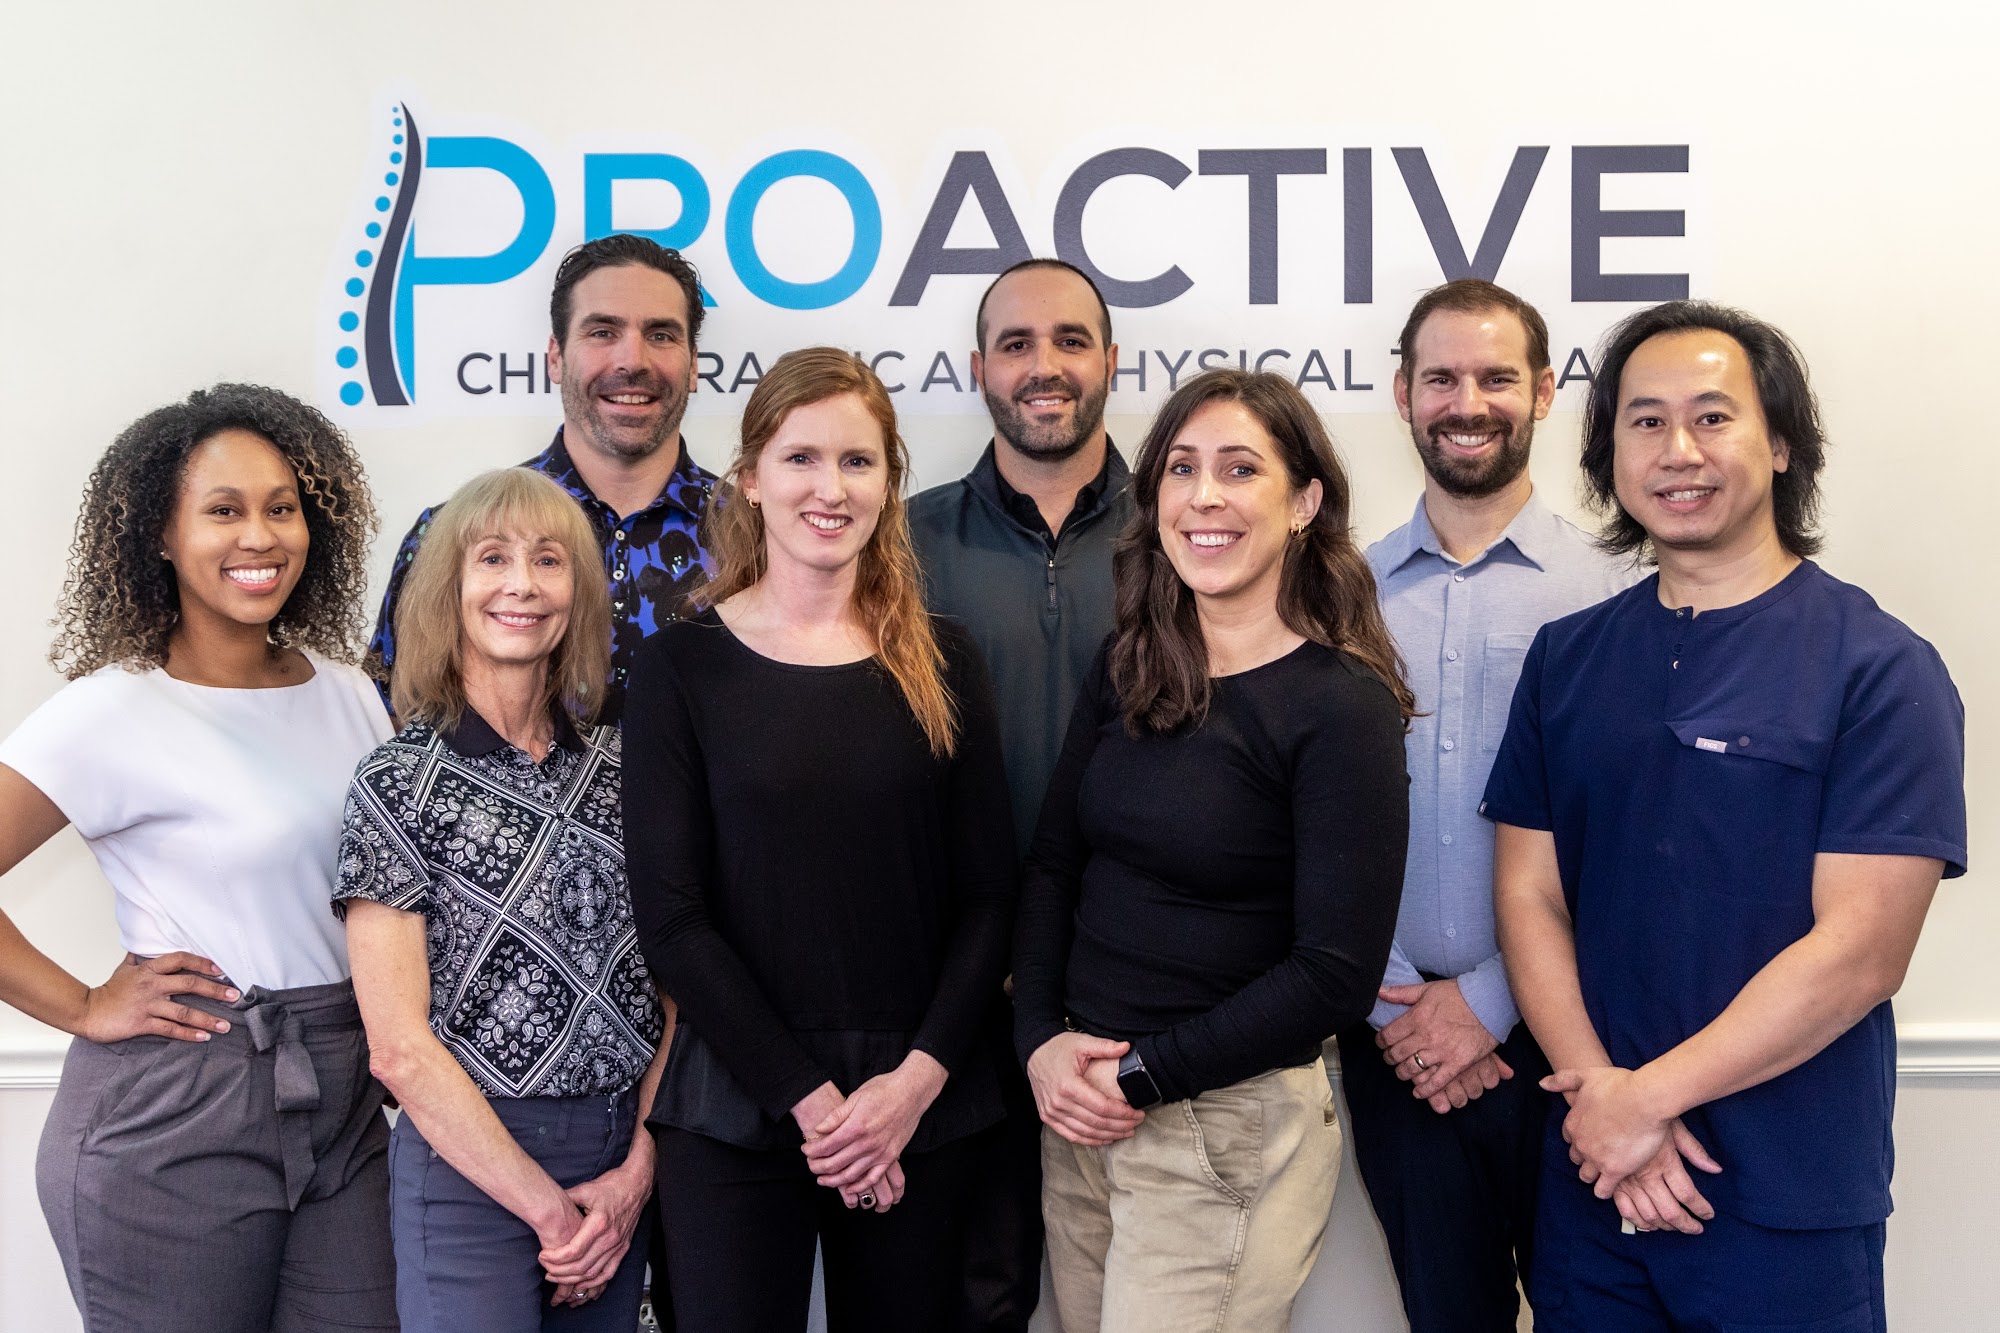 Proactive Chiropractic and Physical Therapy